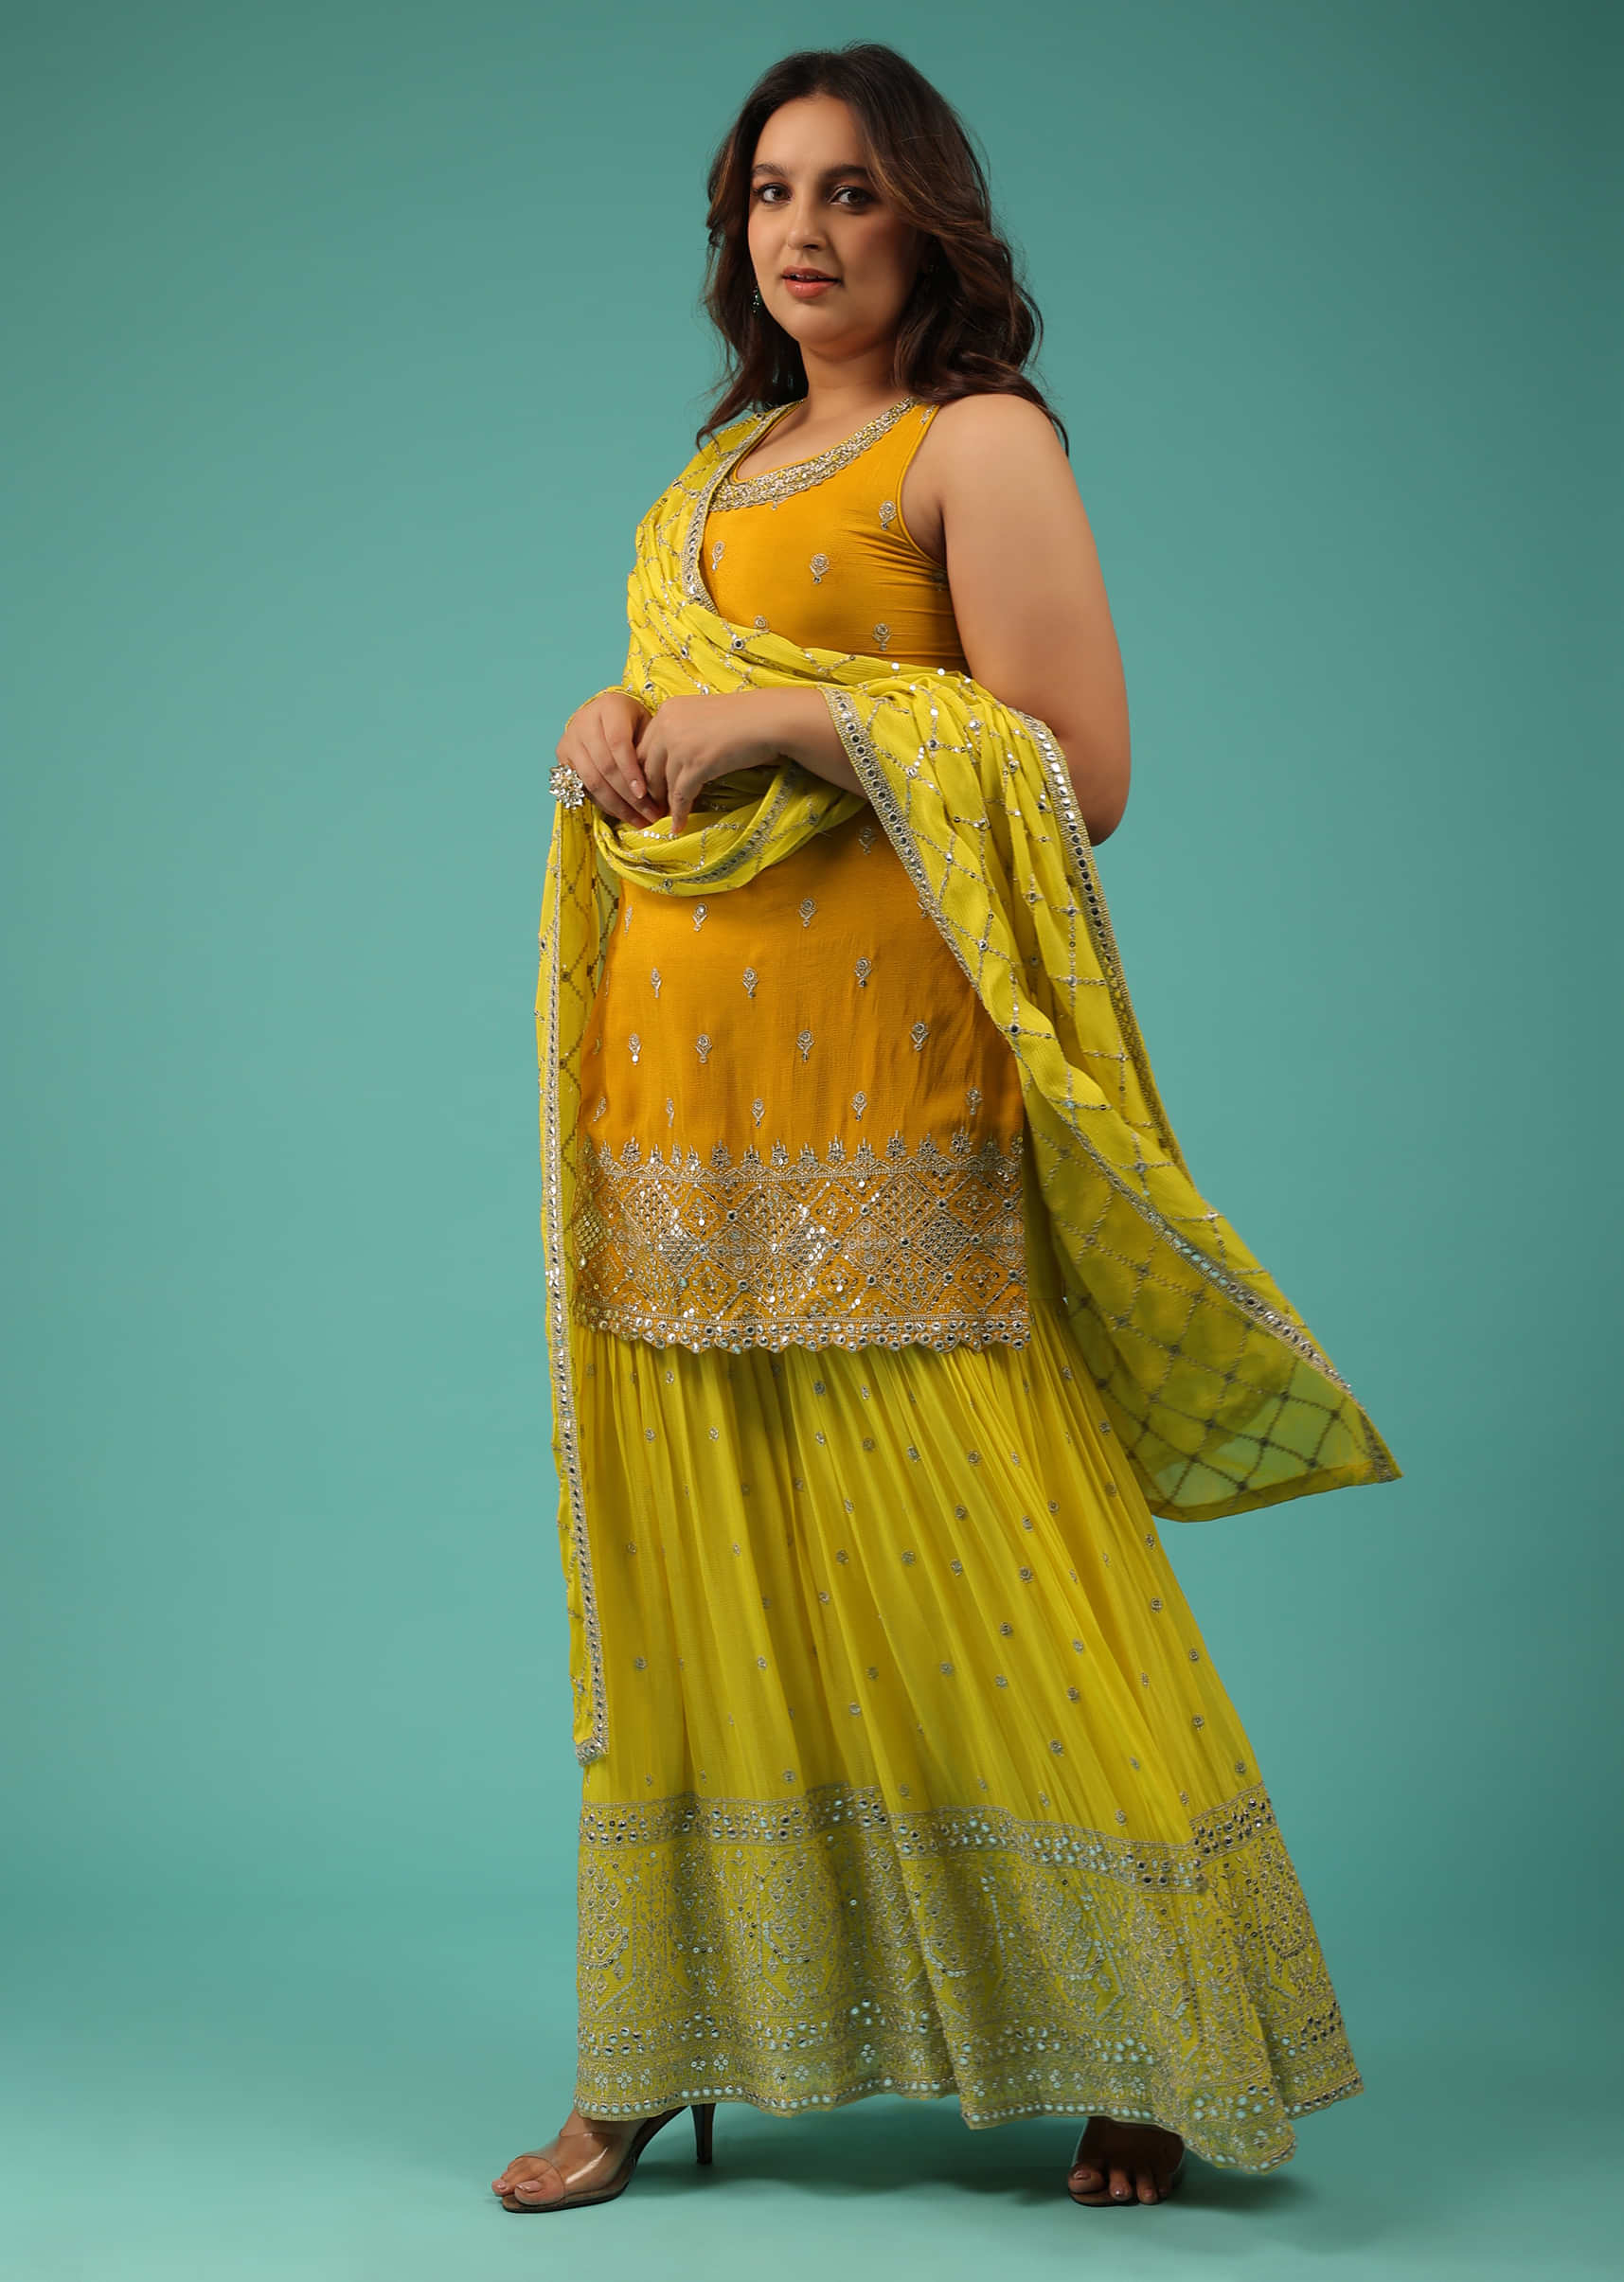 Plus size Indian Outfits for Women